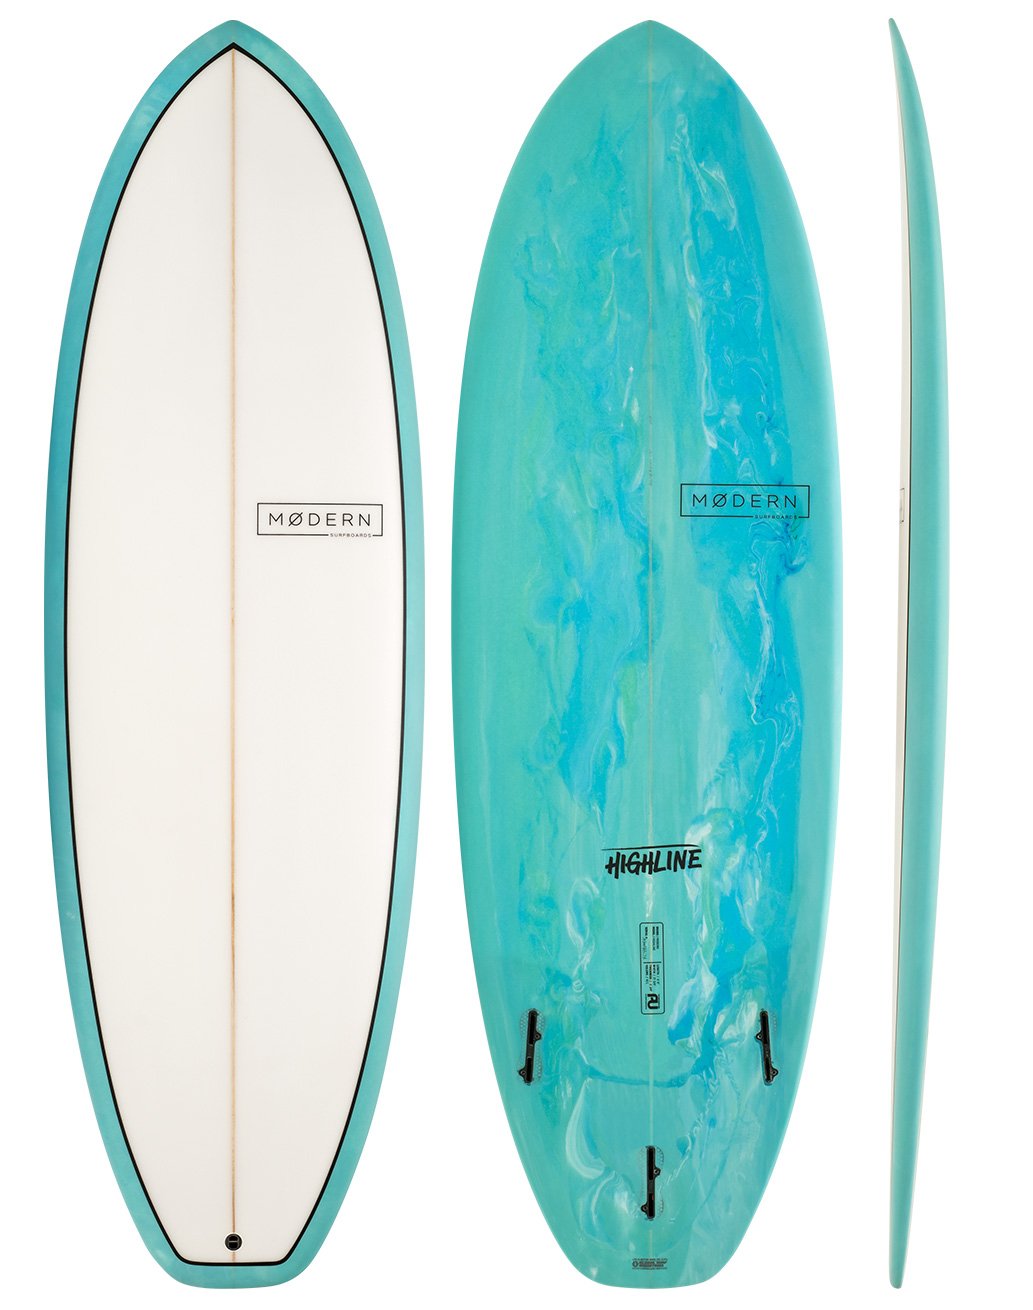 Modern Surfboards - Highline - sea green and white shotrboard